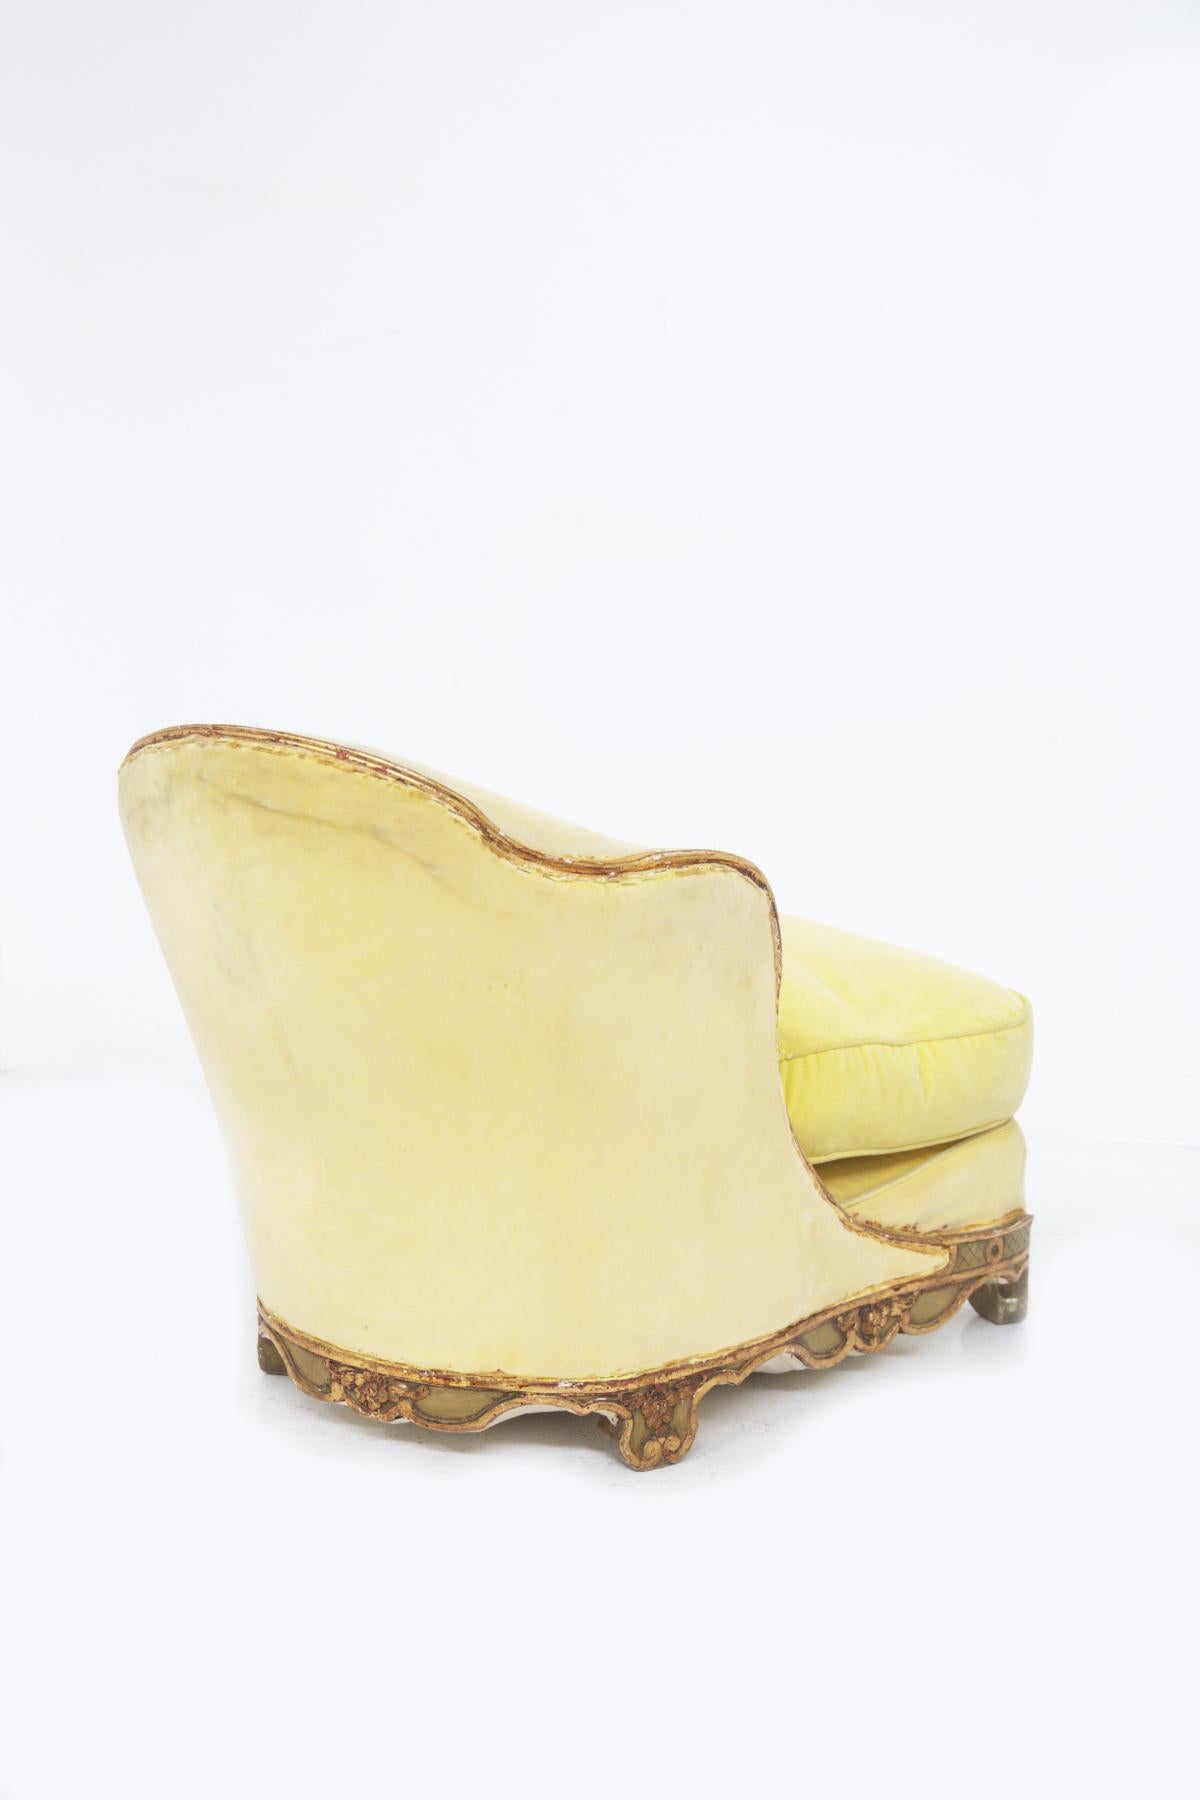 Baroque Armchair in Giltwood and Yellow Velvet For Sale 6